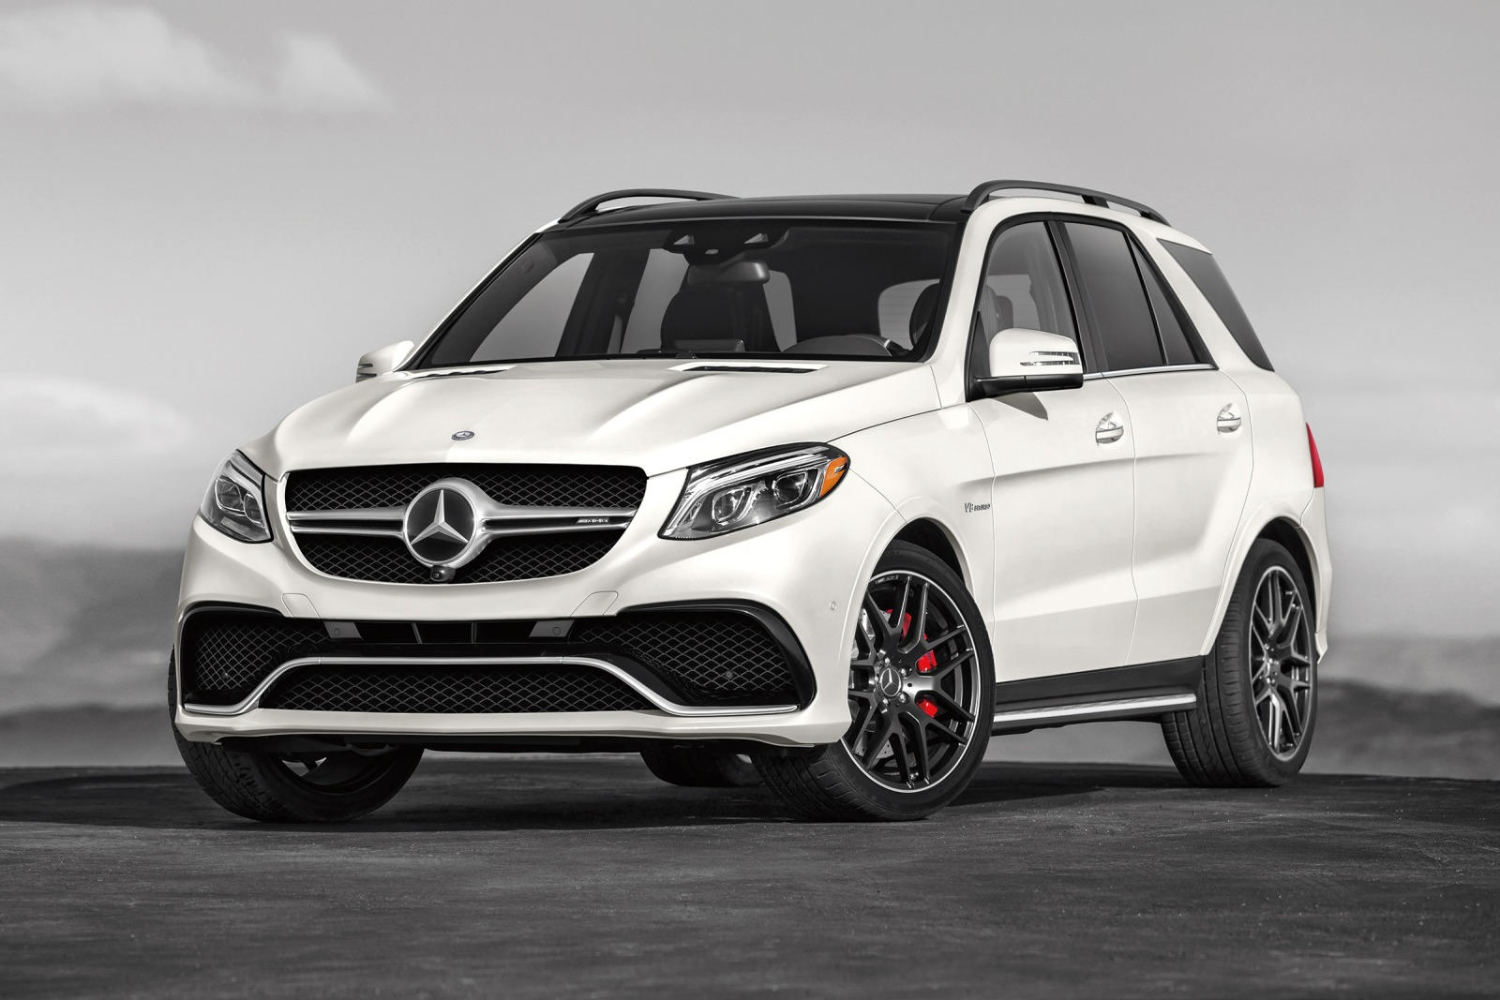 The 2017 Mercedes-AMG GLE63 was stolen during a test drive